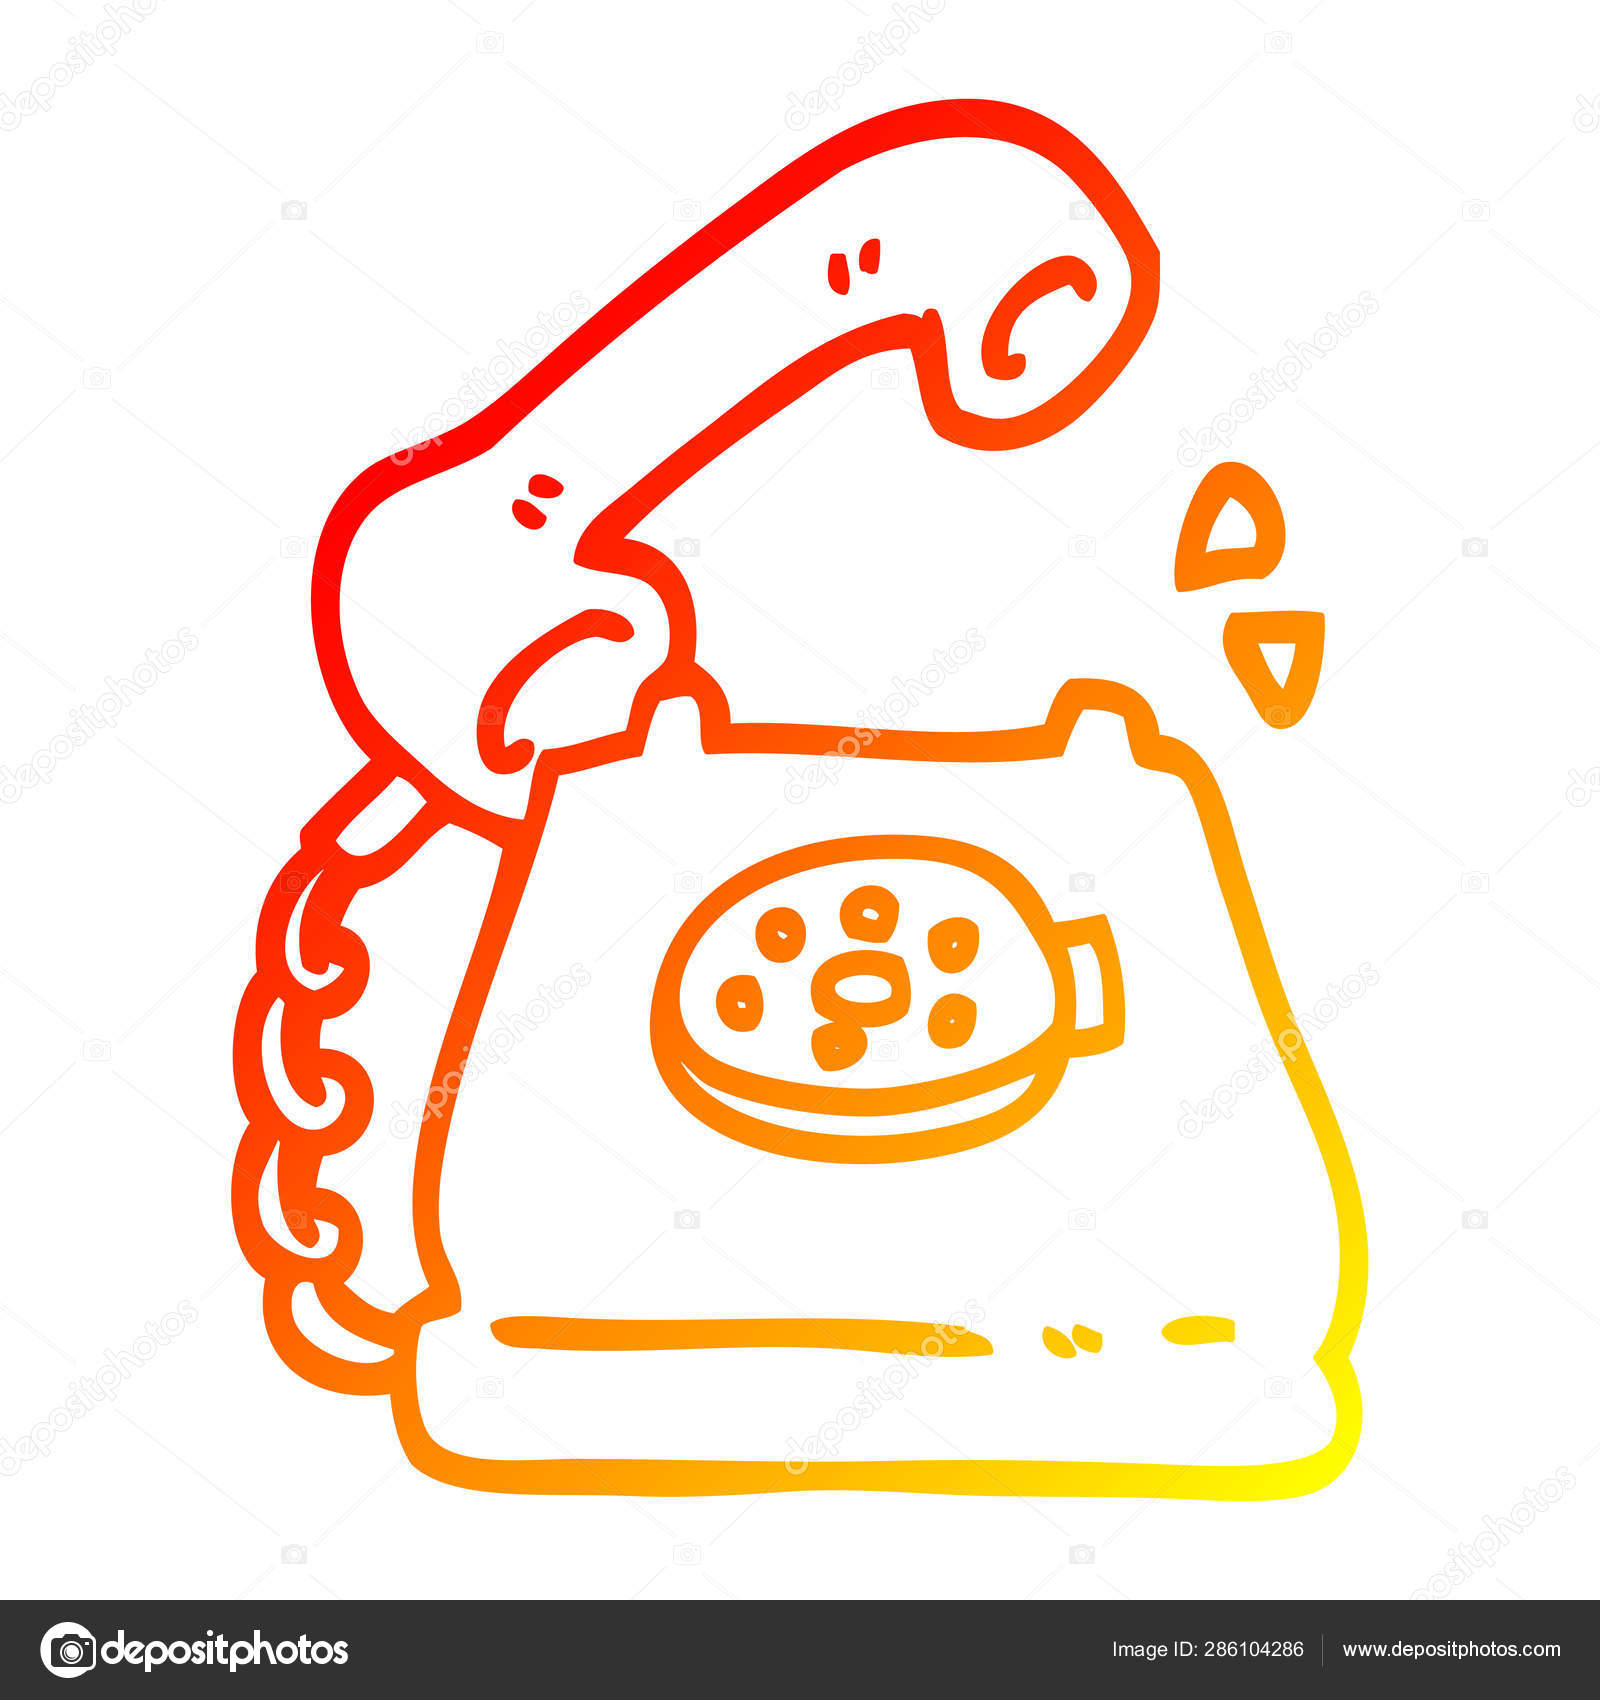 How to Draw a Phone